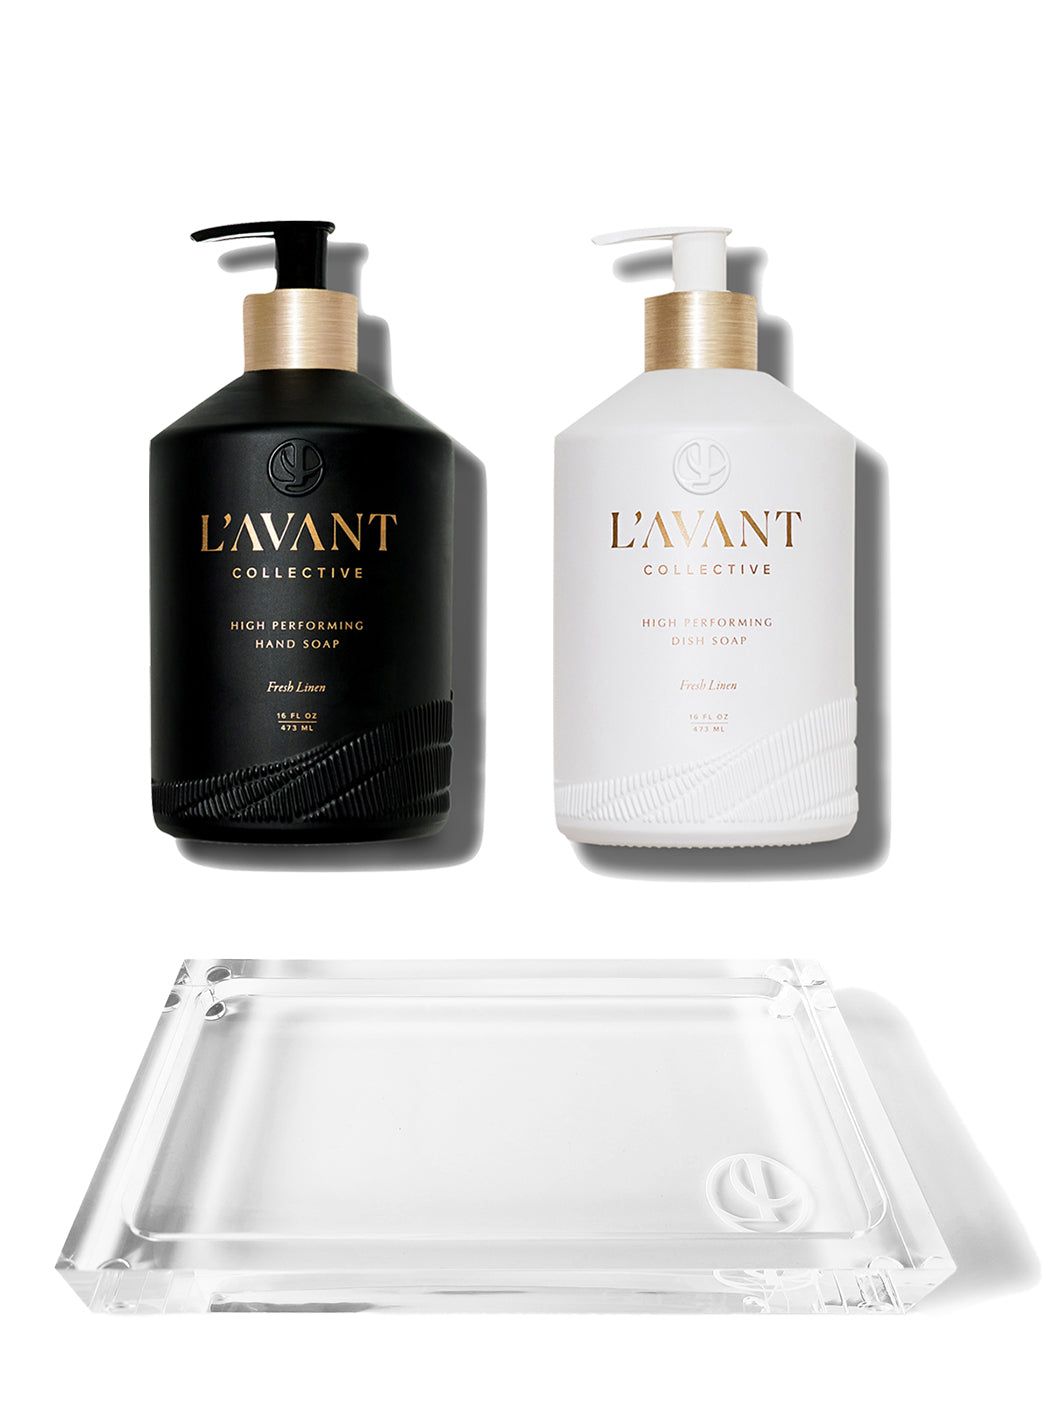 16oz Hand Soap and 16oz Dish Soap and Medium Lucite Tray sized 7x4x1 inches